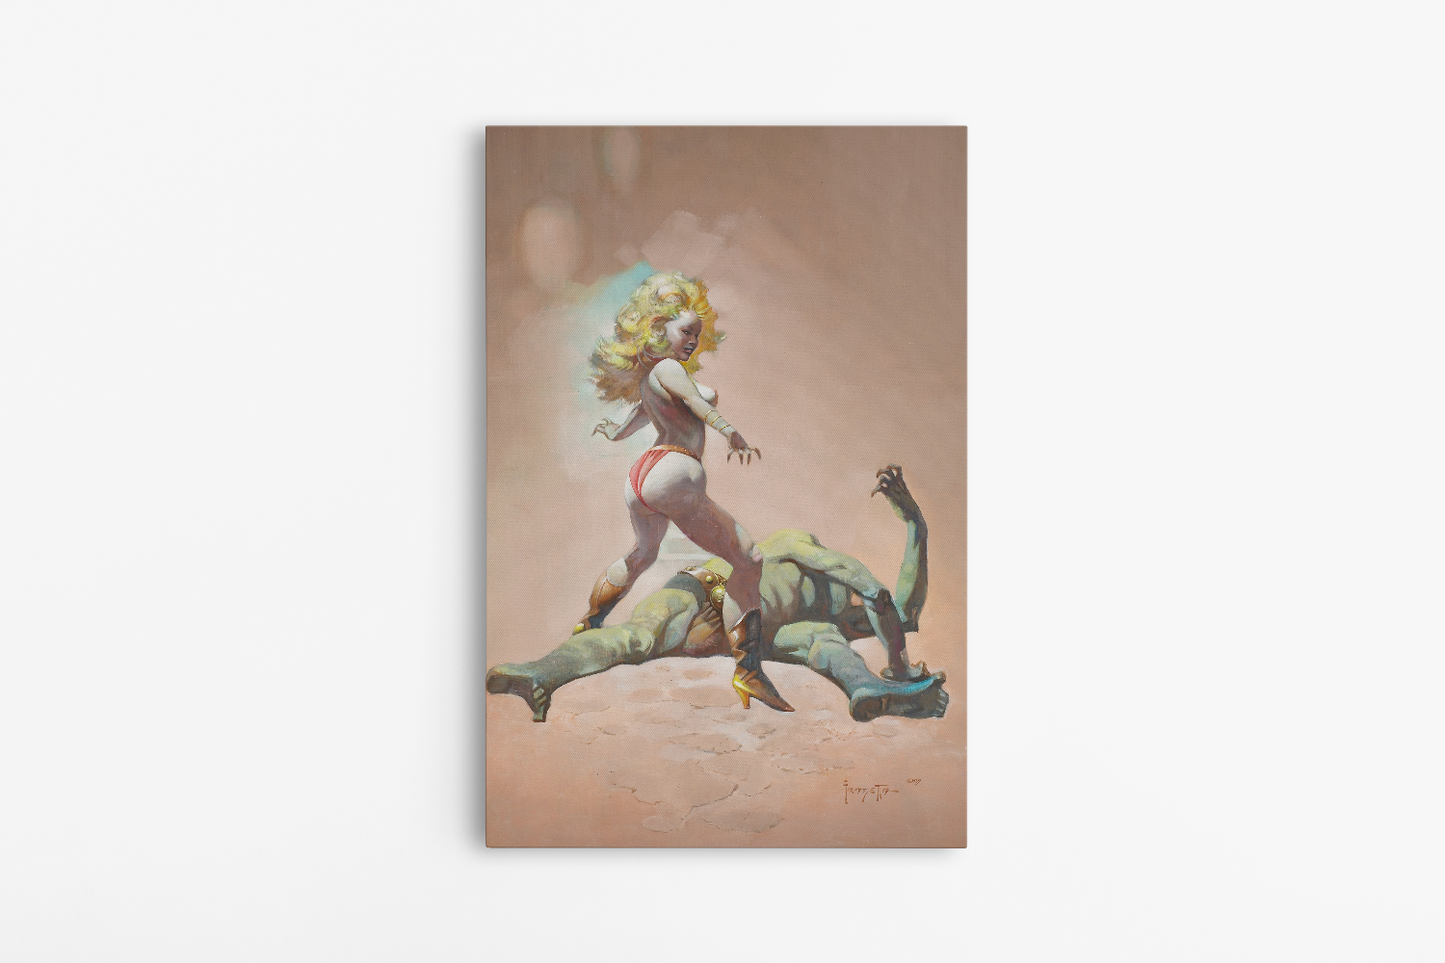 The Countess and the Green Man Mini Wrap-Around Canvas Art